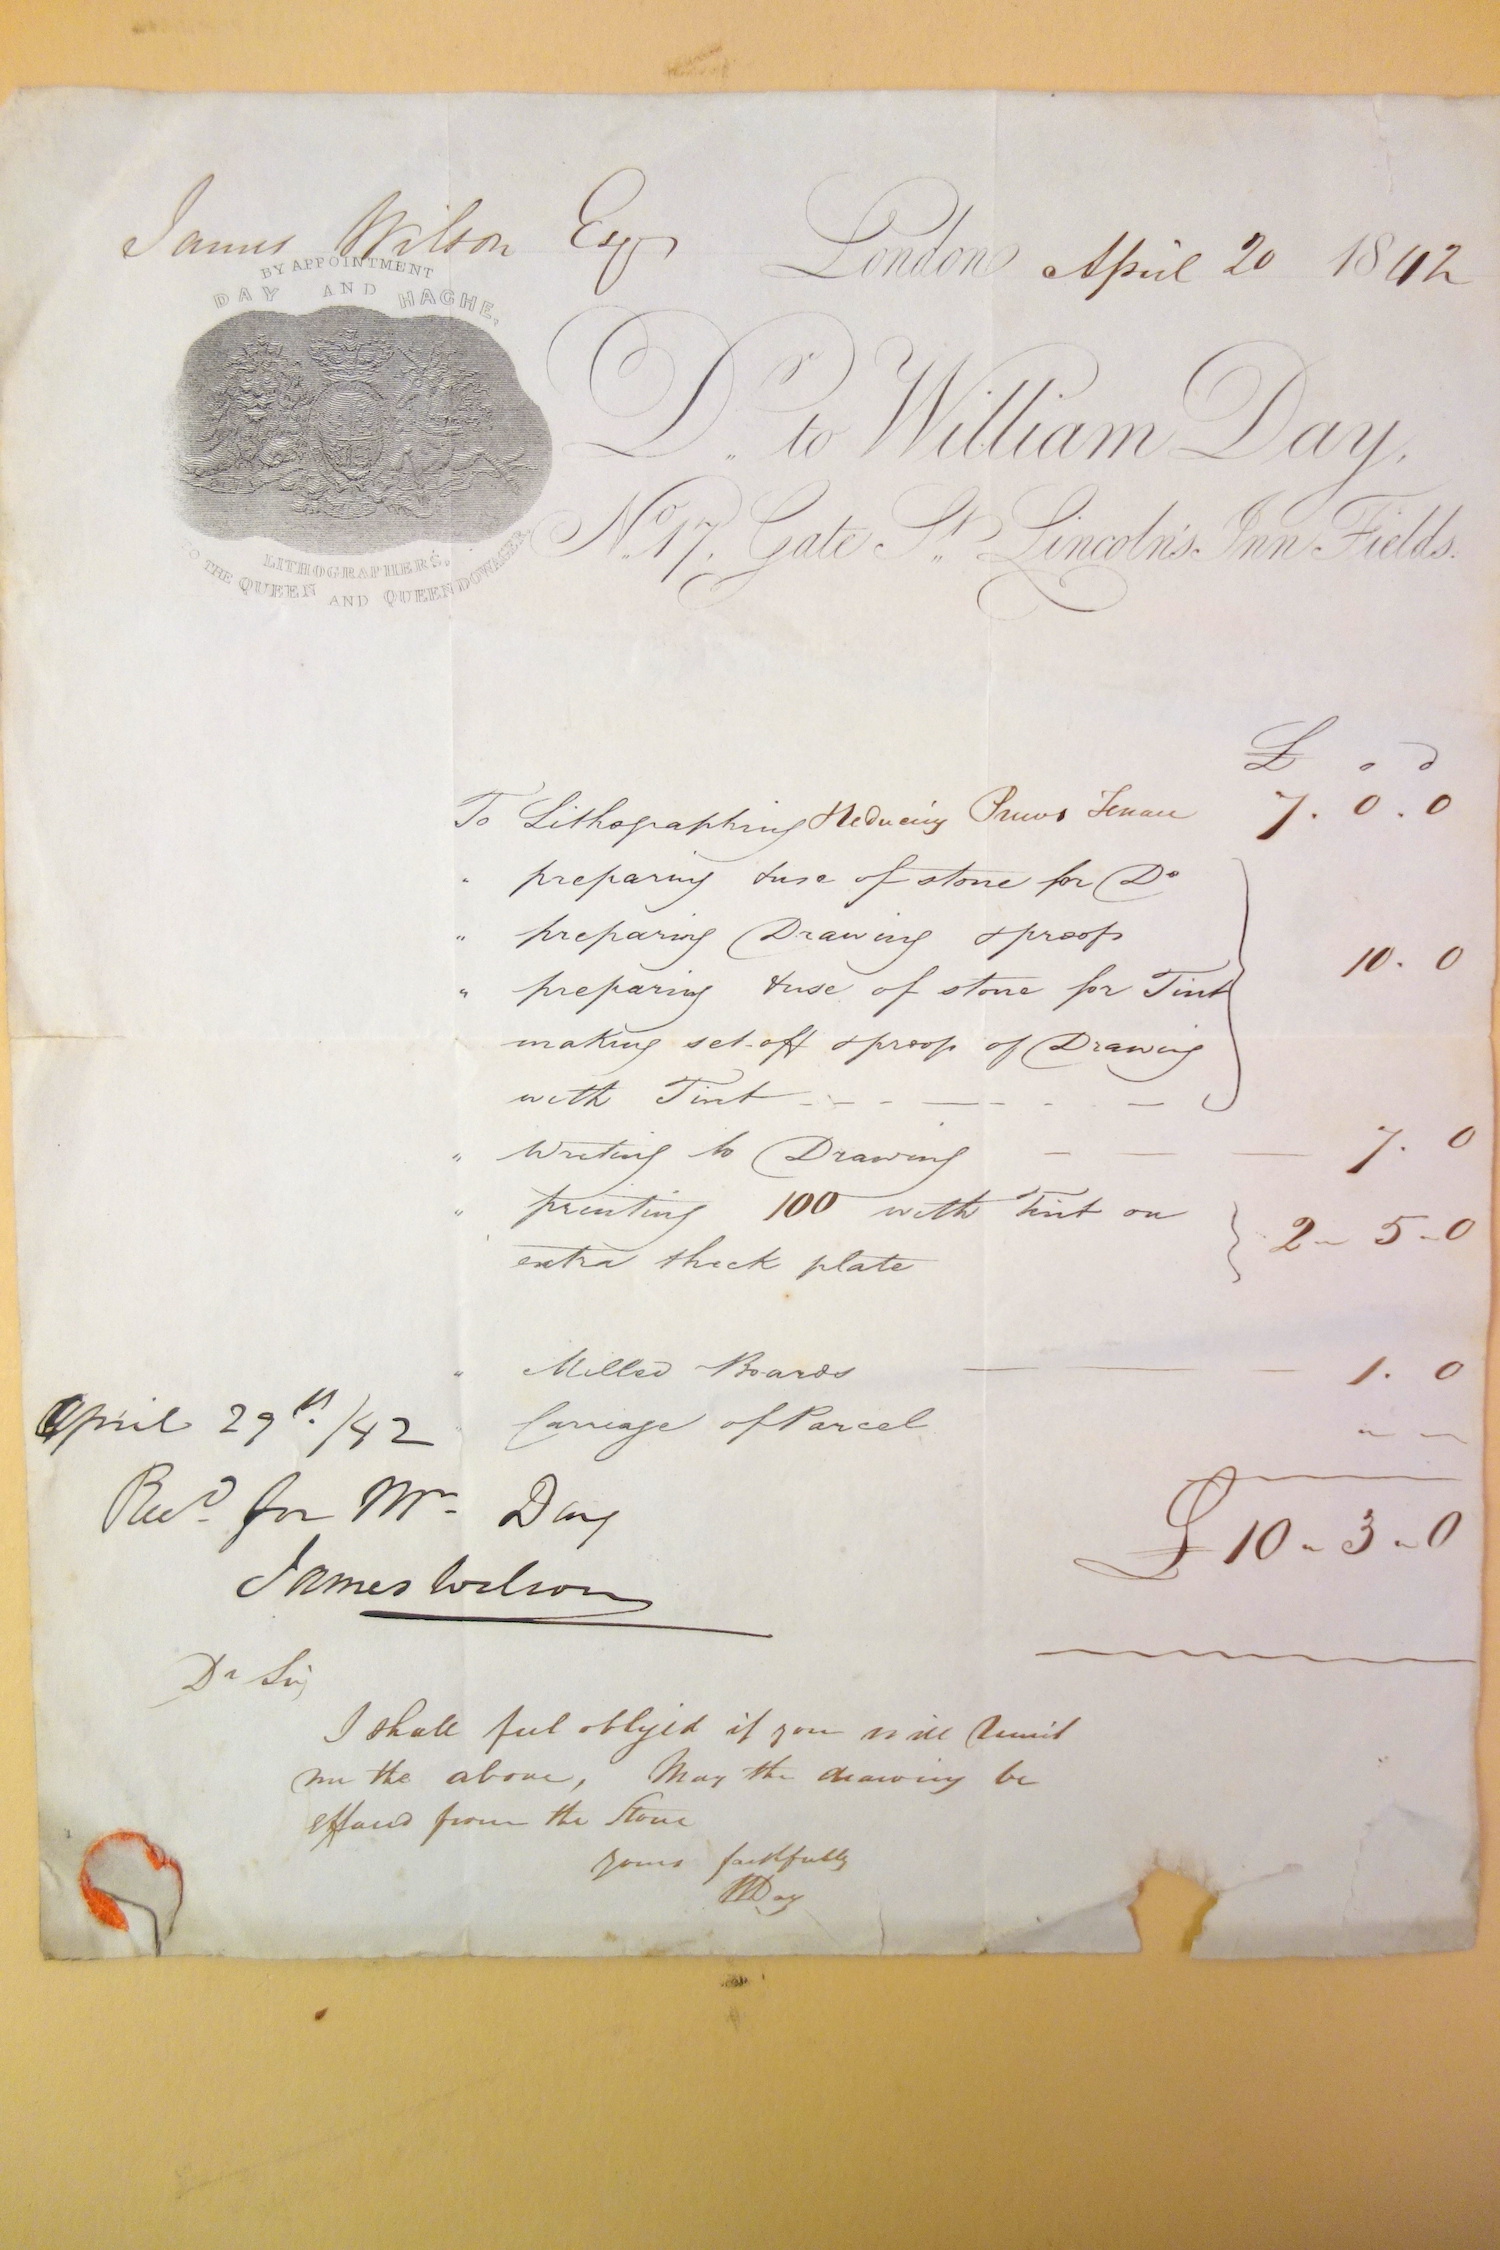 William Day lithography invoice